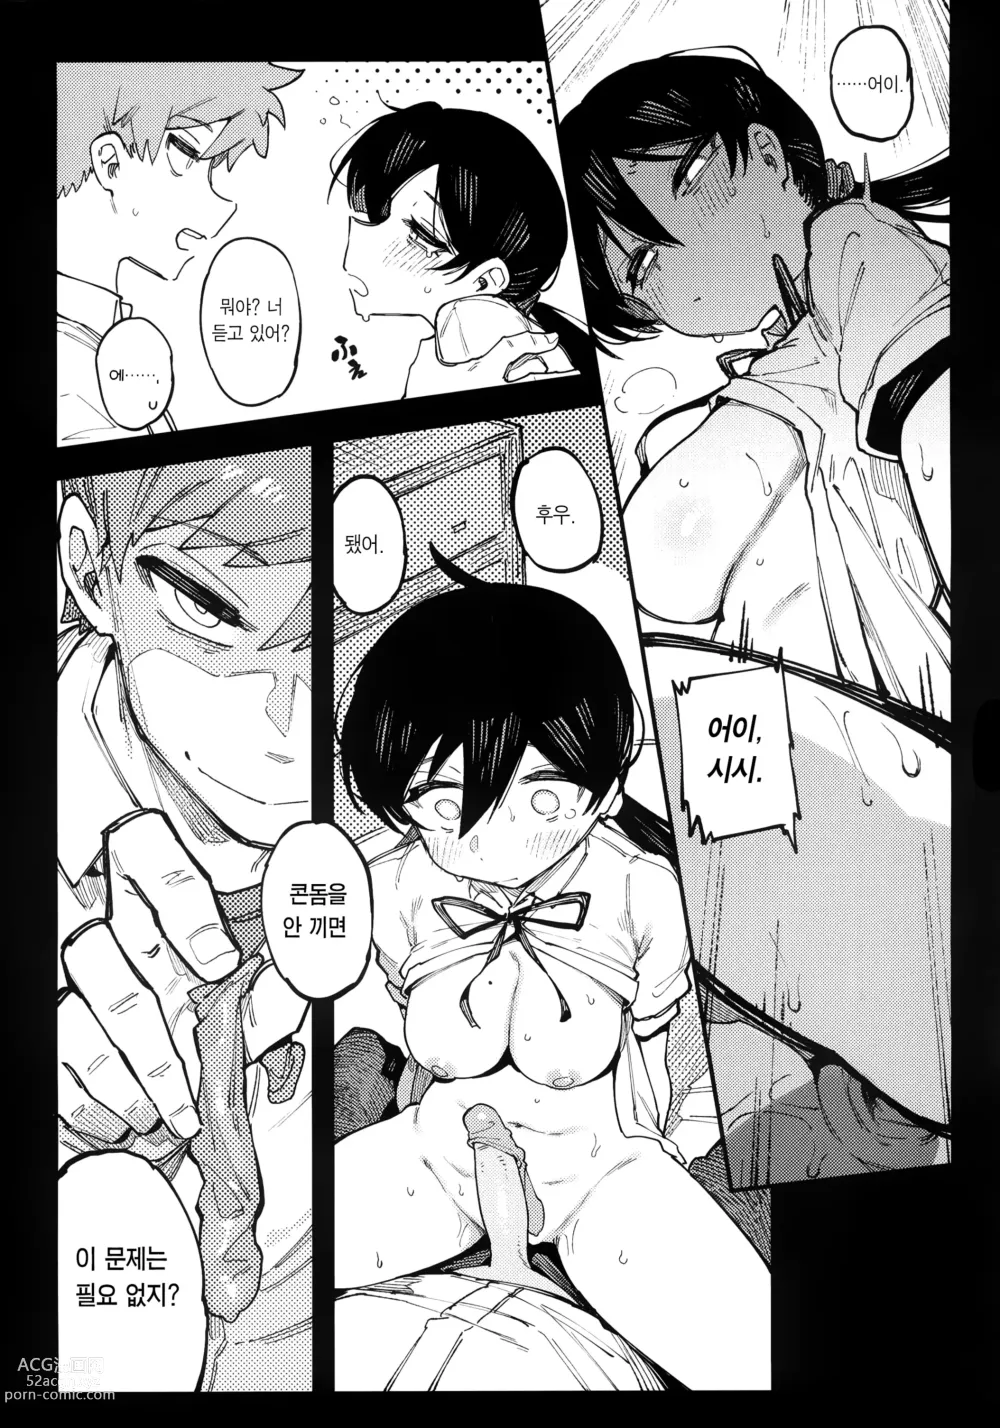 Page 22 of doujinshi 수학 1 상 (decensored)